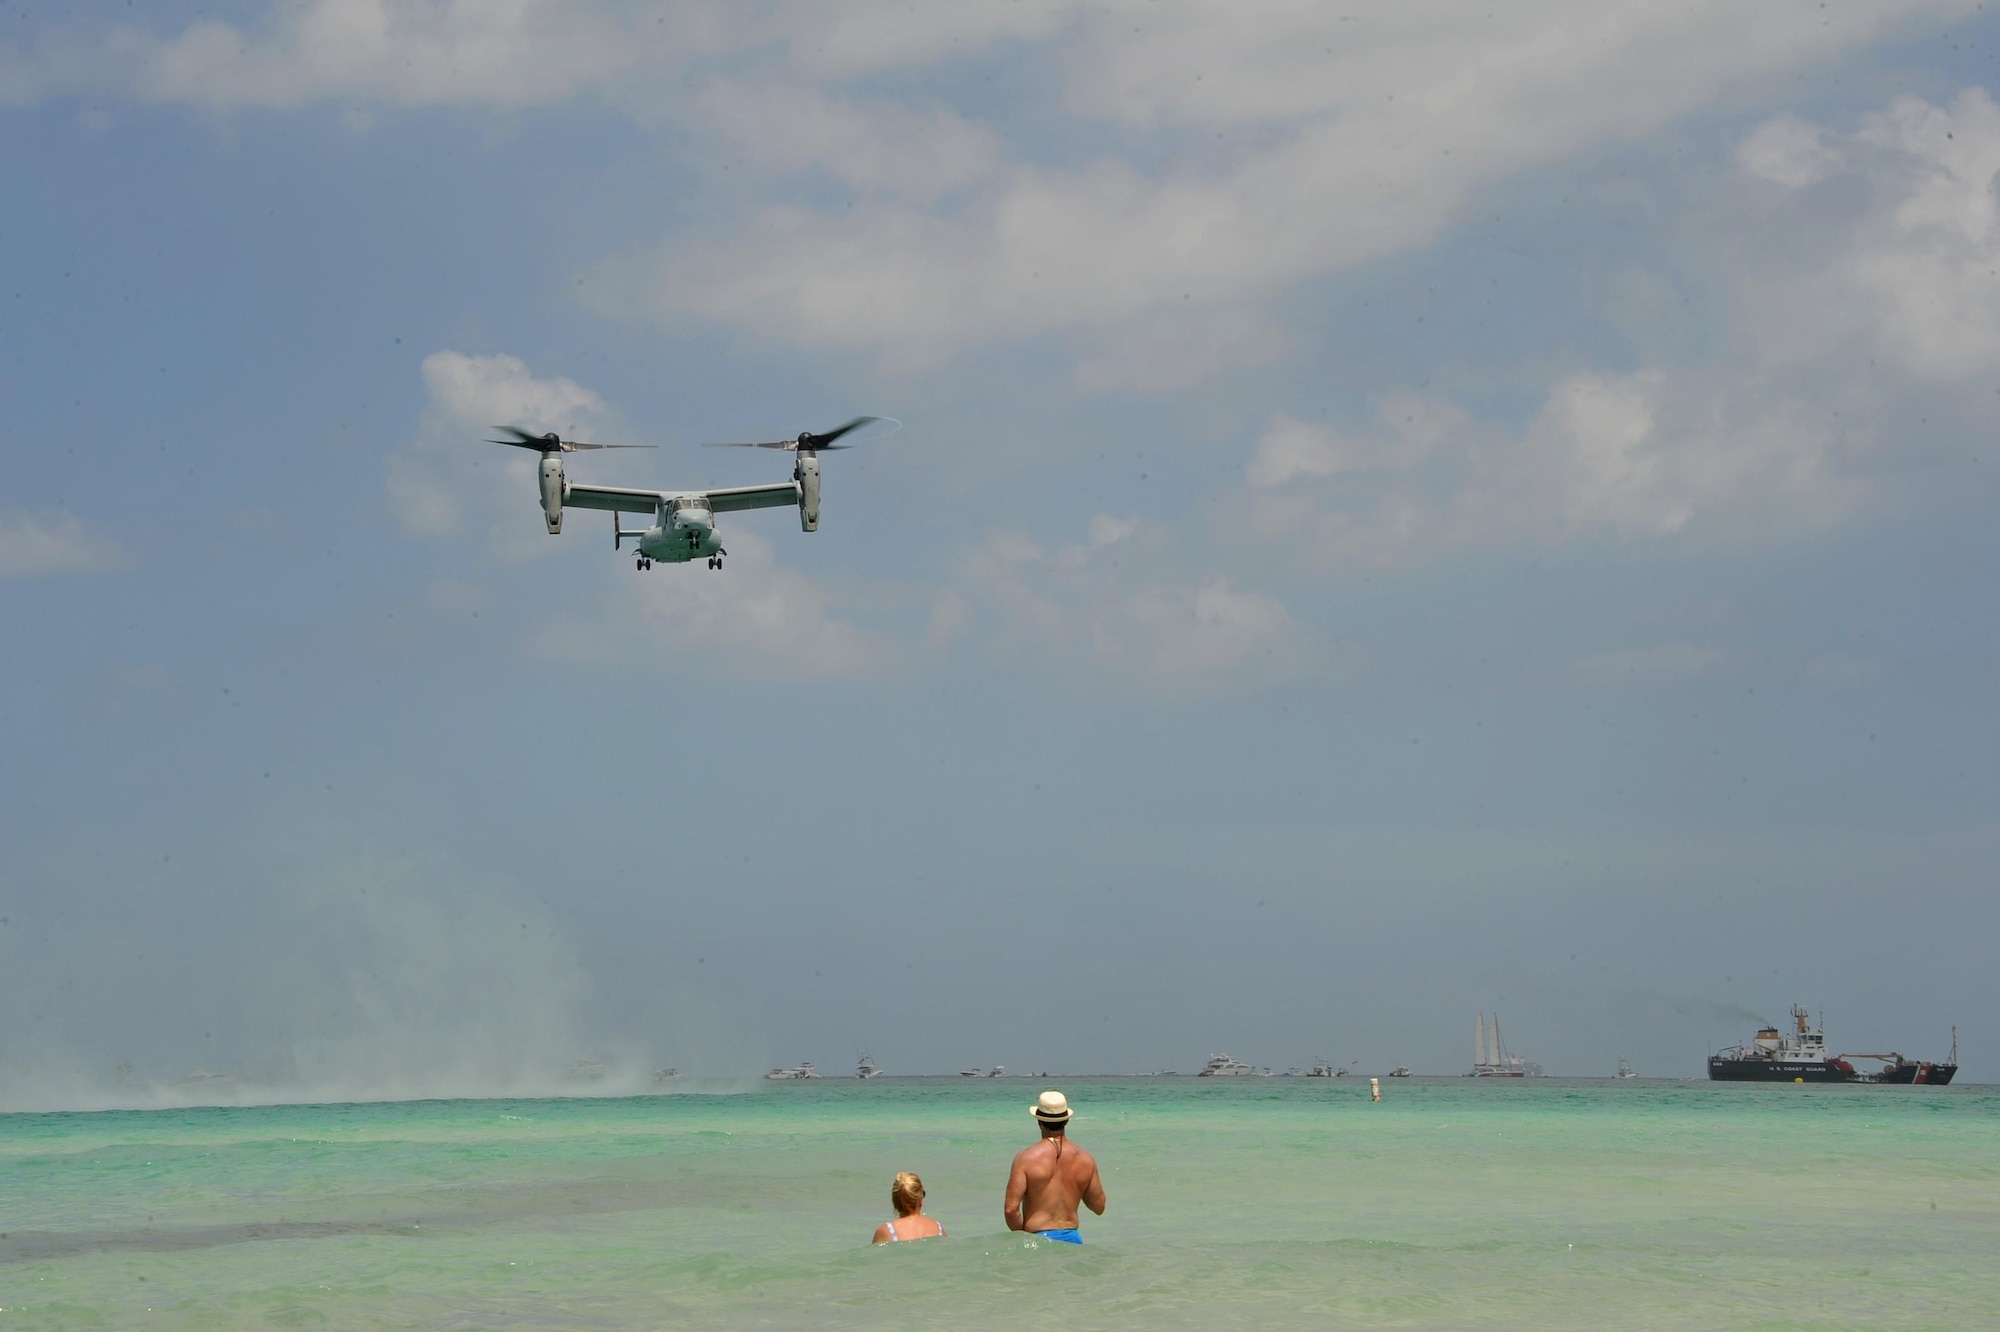 A U.S. Marine MV-22 Osprey hovers over Miami Beach, Fla., during the Salute to America’s Heroes Air and Sea Show in Miami Beach, Fla., May 27, 2017. The airshow featured various aircraft representing each branch of the U.S. Armed Forces, including ground personnel to educate the public and airshow attendees about their respective branch’s mission. (U.S. Air Force photo by Senior Airman Erin Trower)